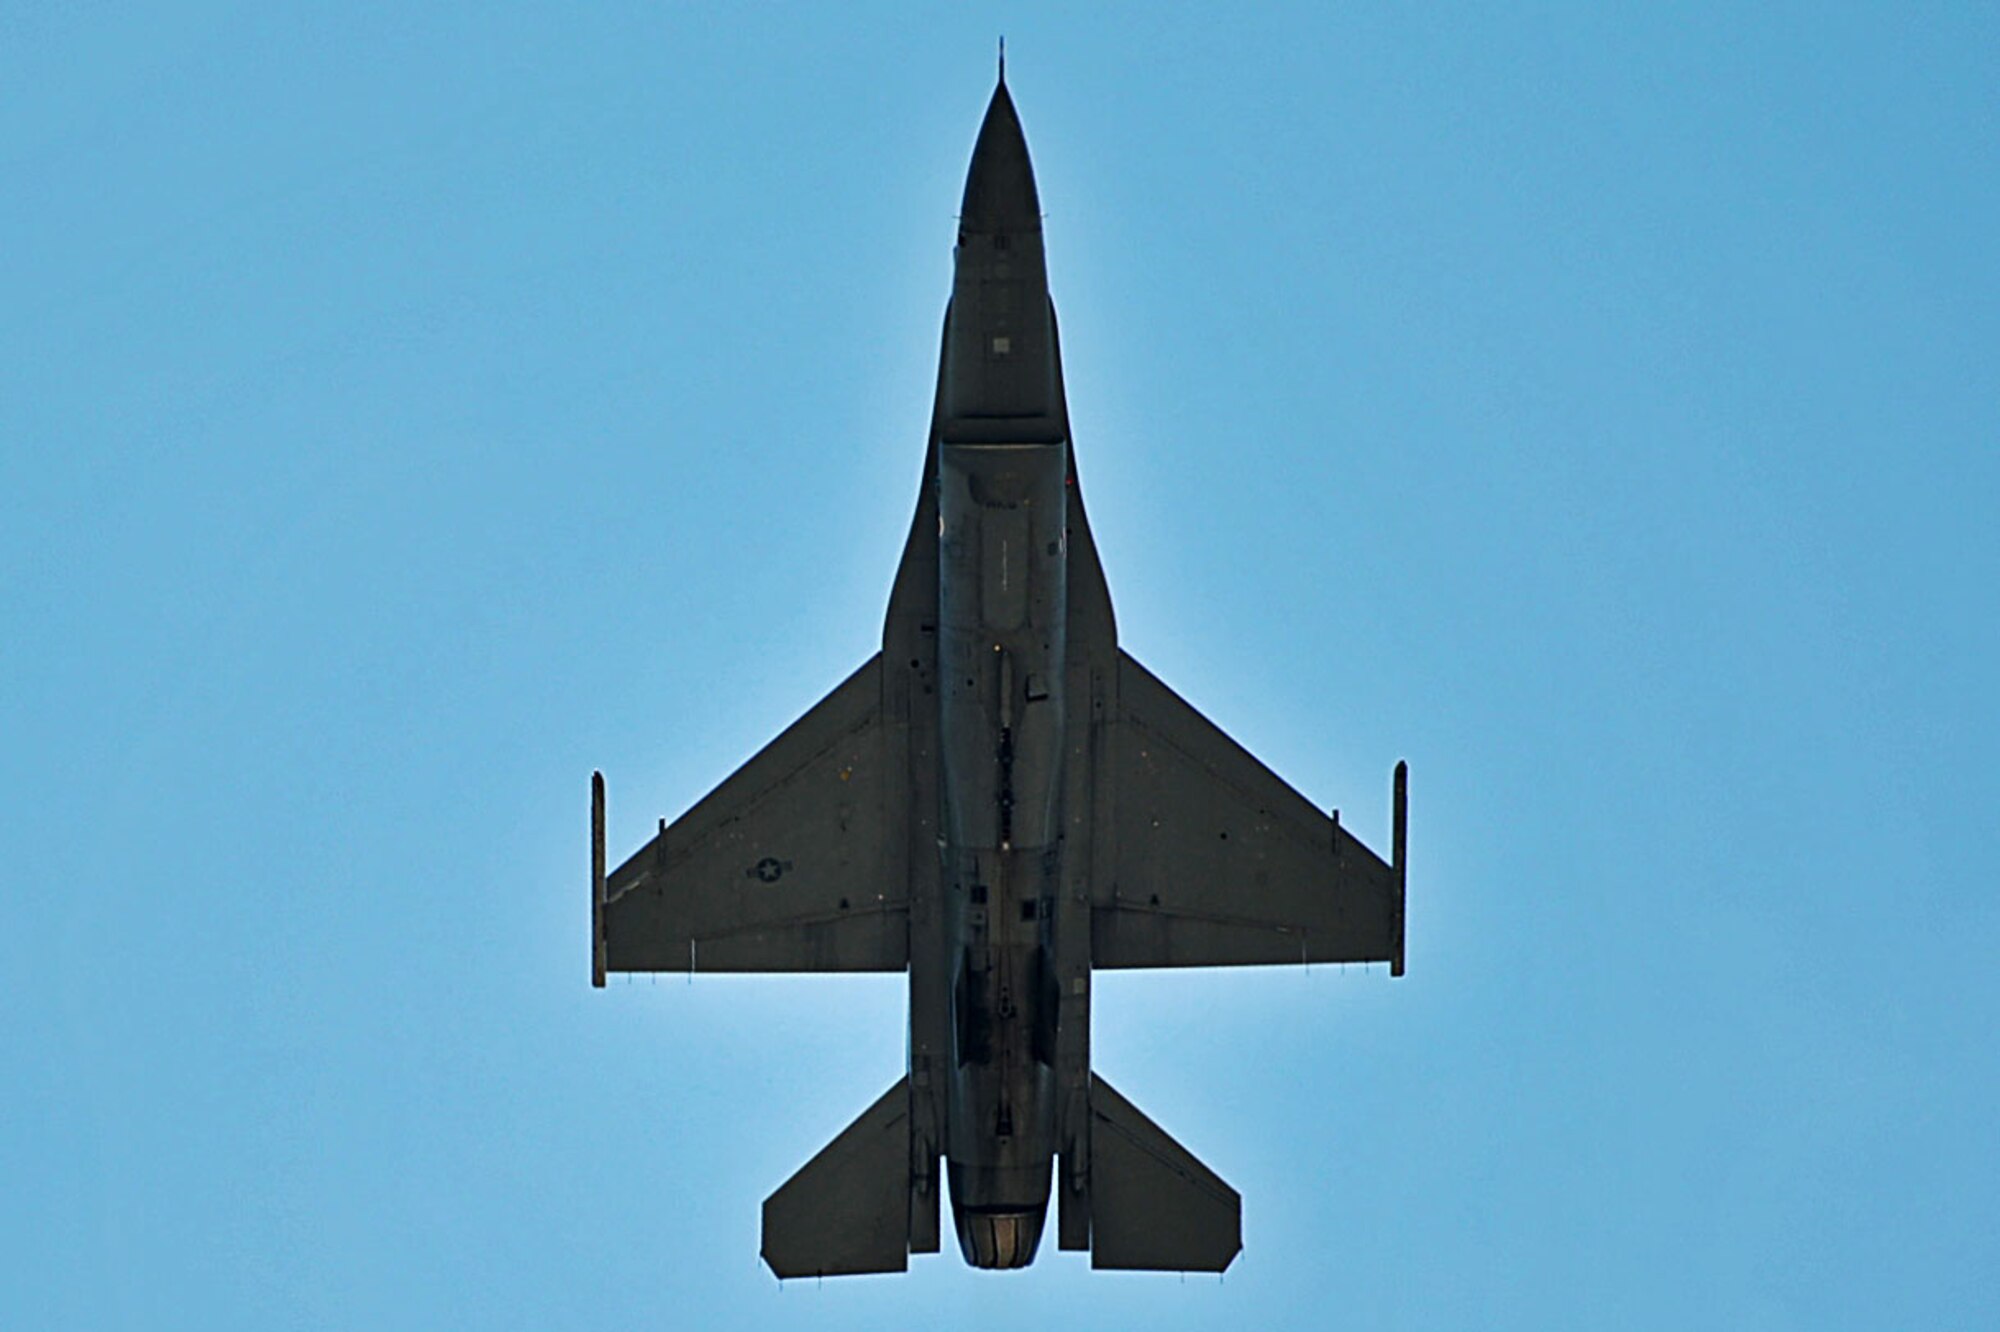 A U.S. Air Force F-16CM Fighting Falcon, piloted by Major John “Rain” Waters, Air Combat Command F-16 Viper Demonstration Team commander and pilot, performs an aerial practice at Shaw Air Force Base, S.C., July 28, 2017. The team performs precision aerial maneuvers to demonstrate the combat capabilities of one of the U.S. Air Force's premier multi-role fighters, the F-16 Fighting Falcon. (U.S. Air Force photo by Senior Airman Christopher Maldonado)